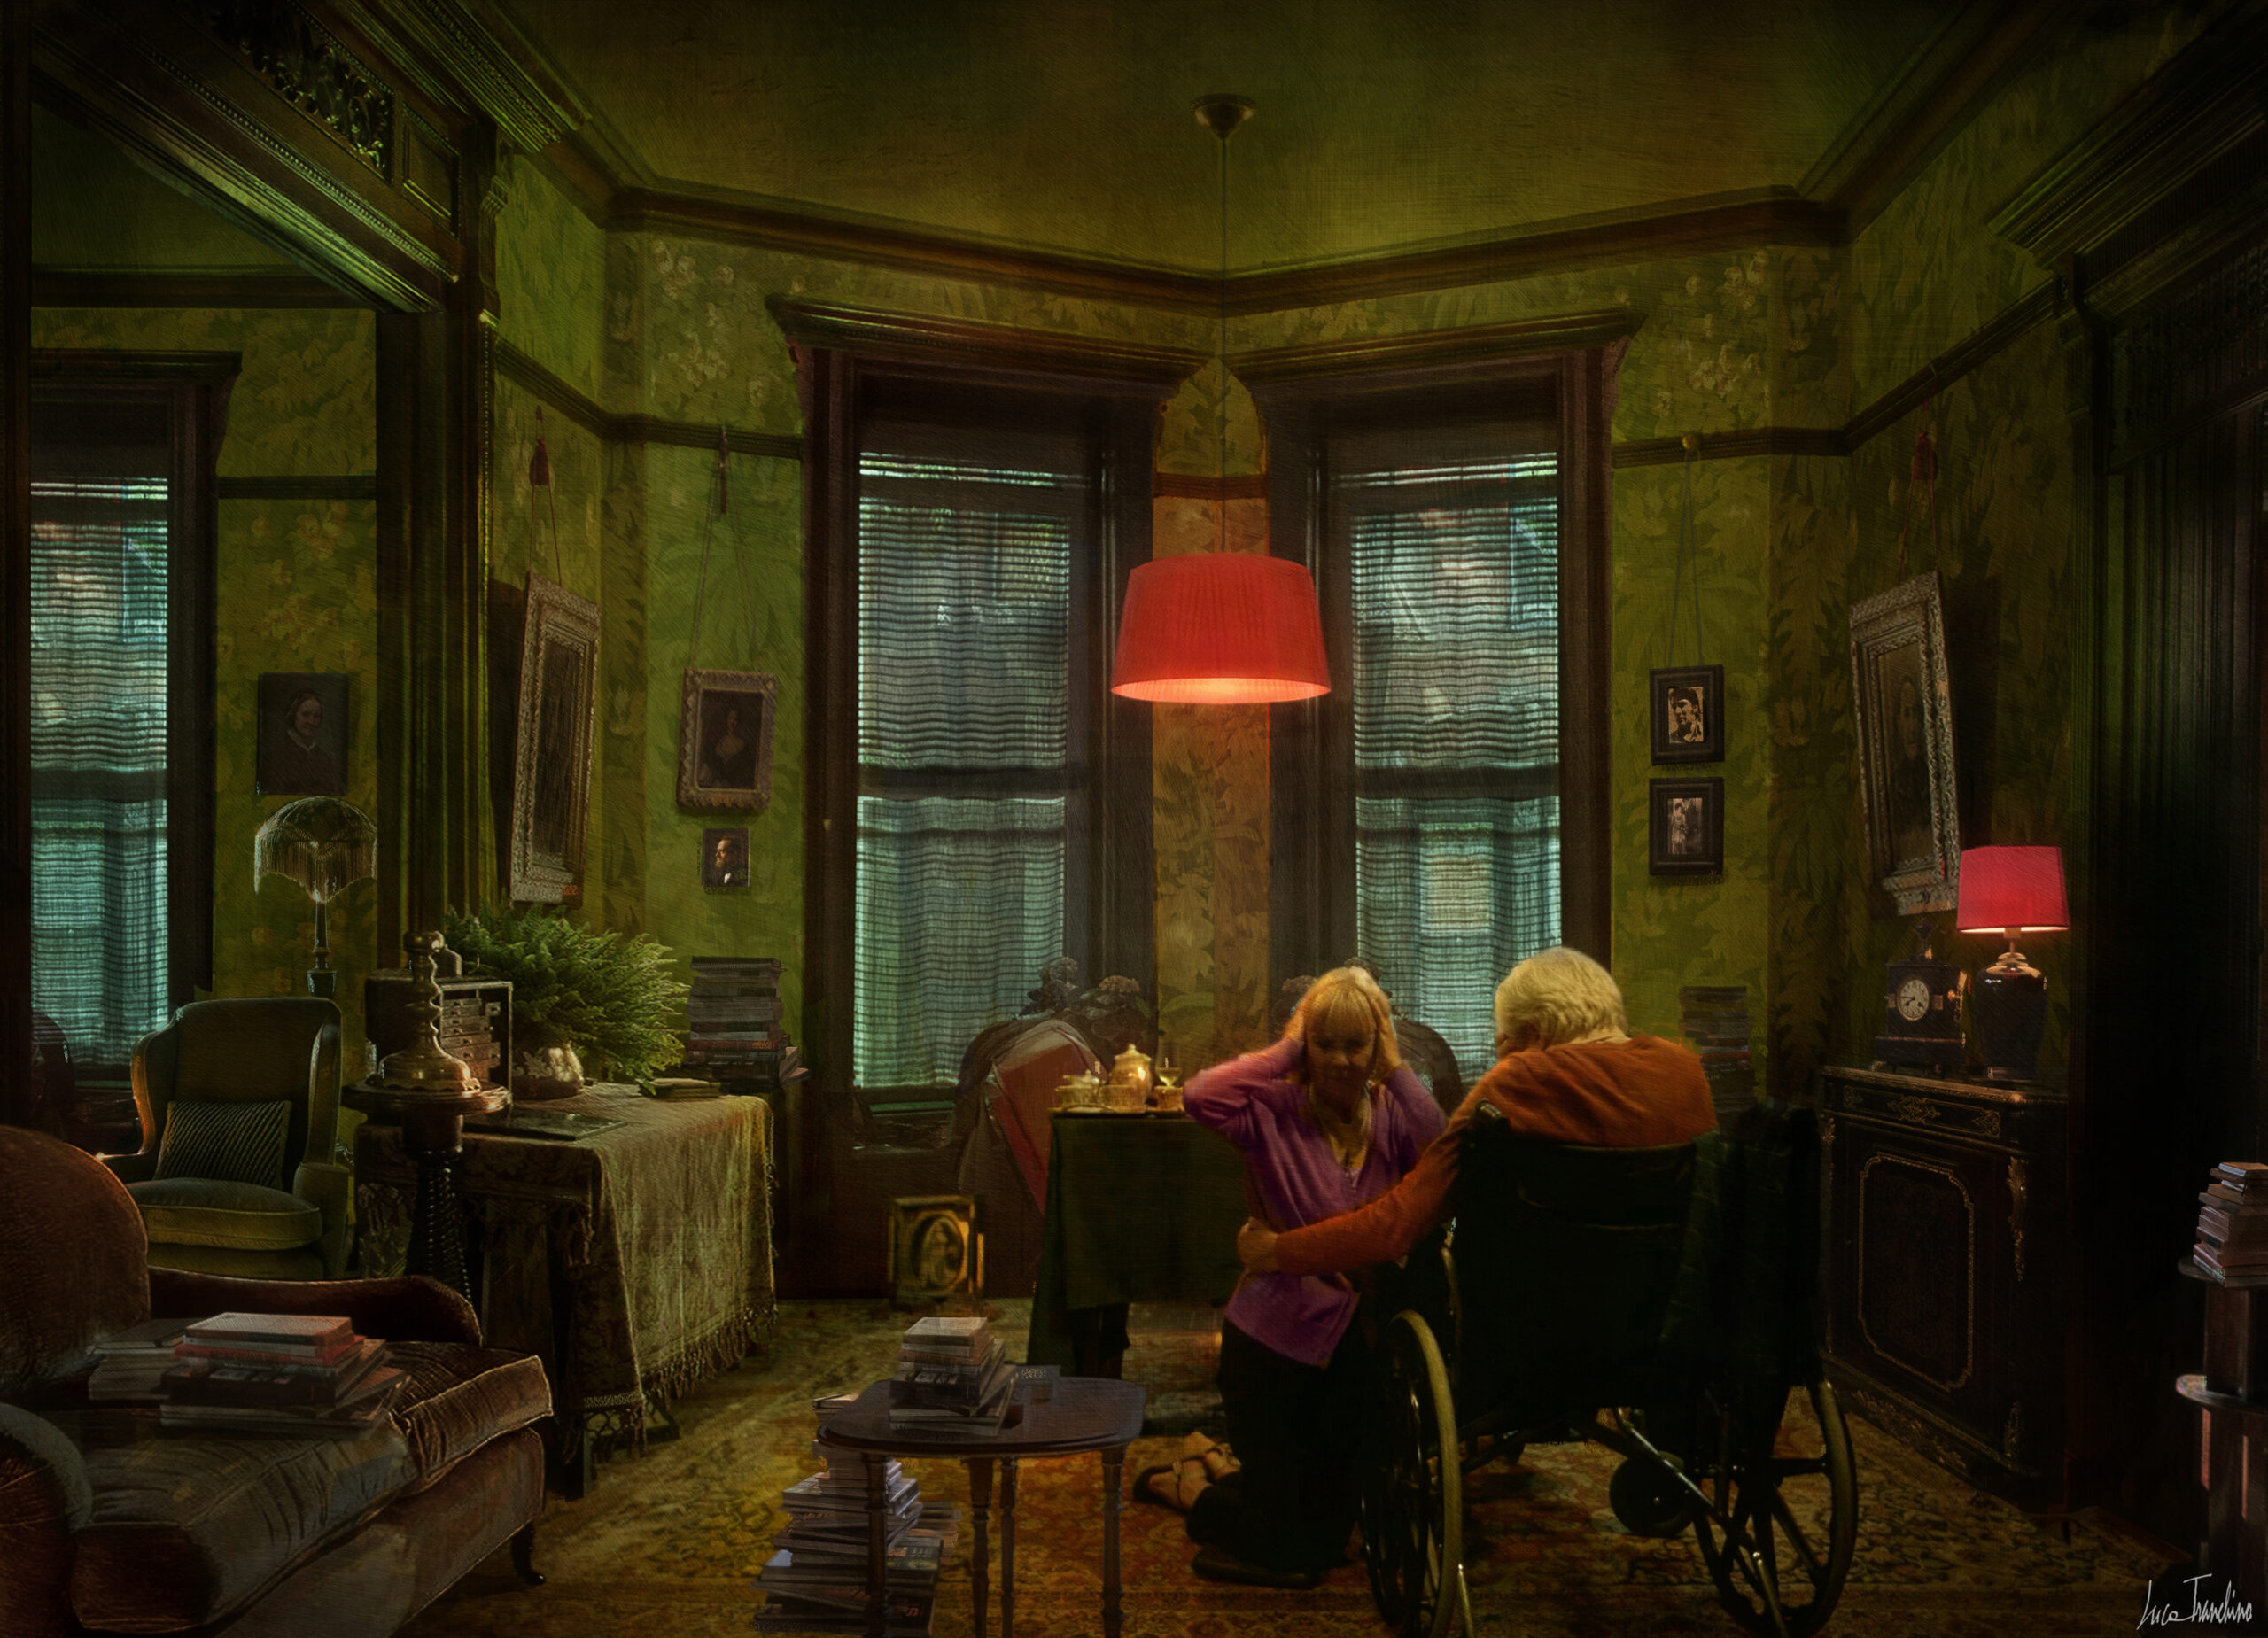 THE DOORMAN - Directed by Ryuhei Kitamura - Production Design by Luca Tranchino – Int. Hersh Apartment, Concept Art by Luca Tranchino - ©2020 - Lionsgate